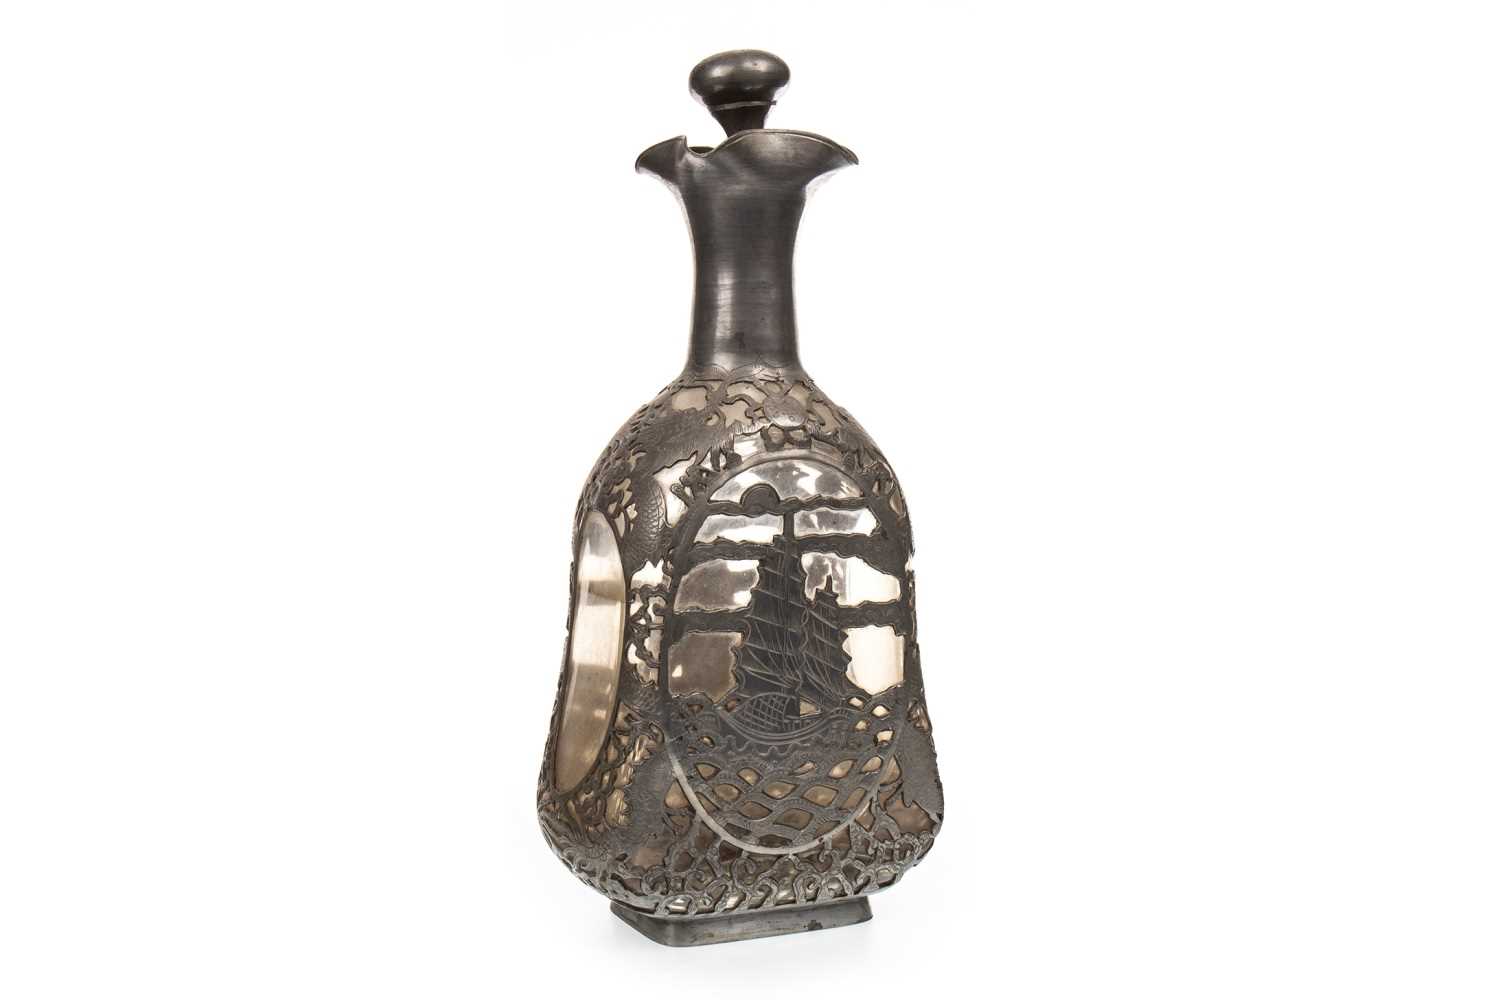 Lot 1108 - A 20TH CENTURY PEWTER OVERLAID GLASS DECANTER